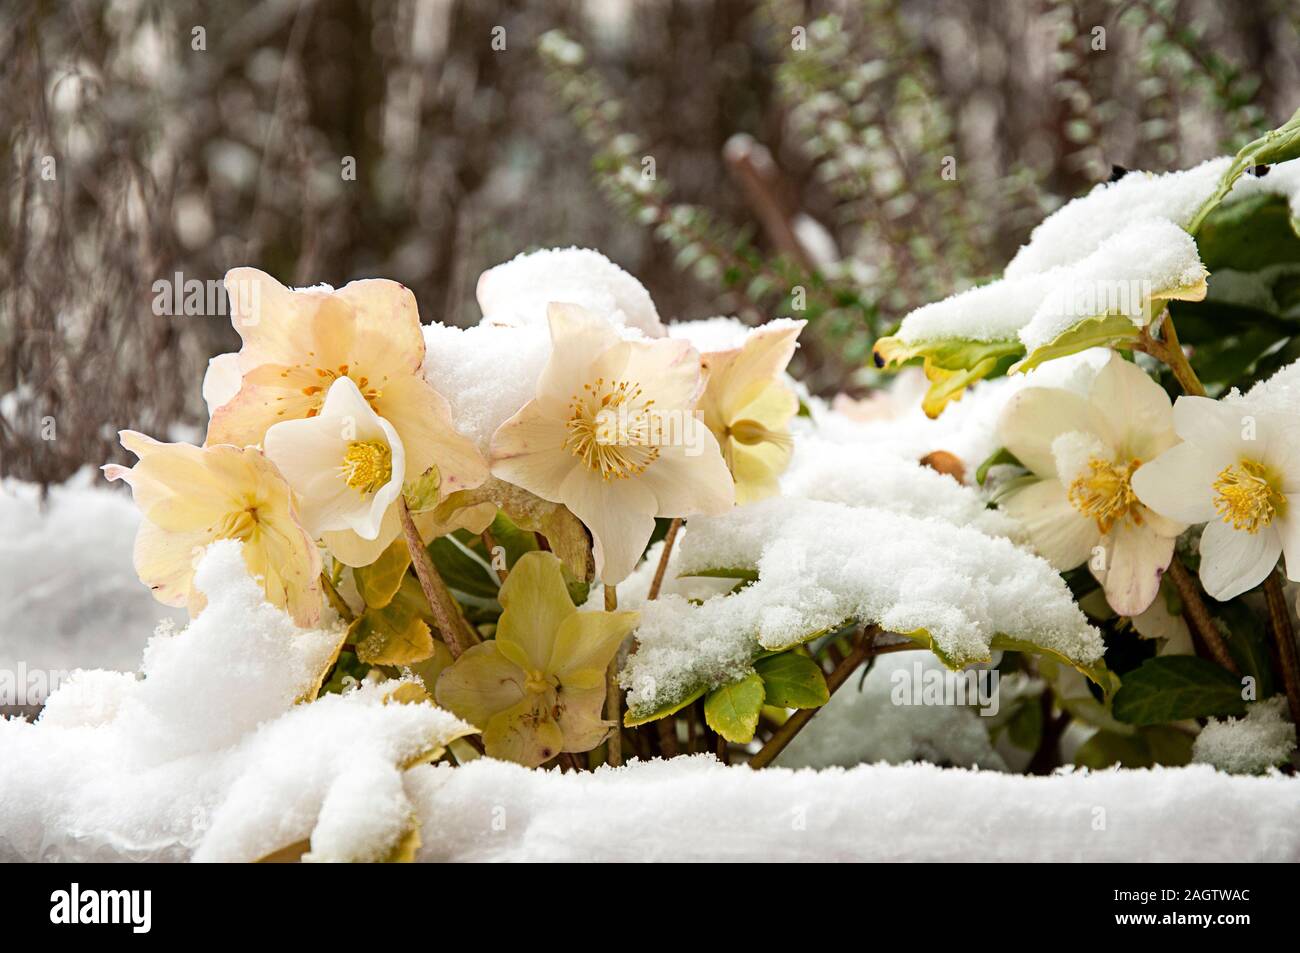 Snow-covered helleborus niger with a blurry hedgerow background by jziprian Stock Photo